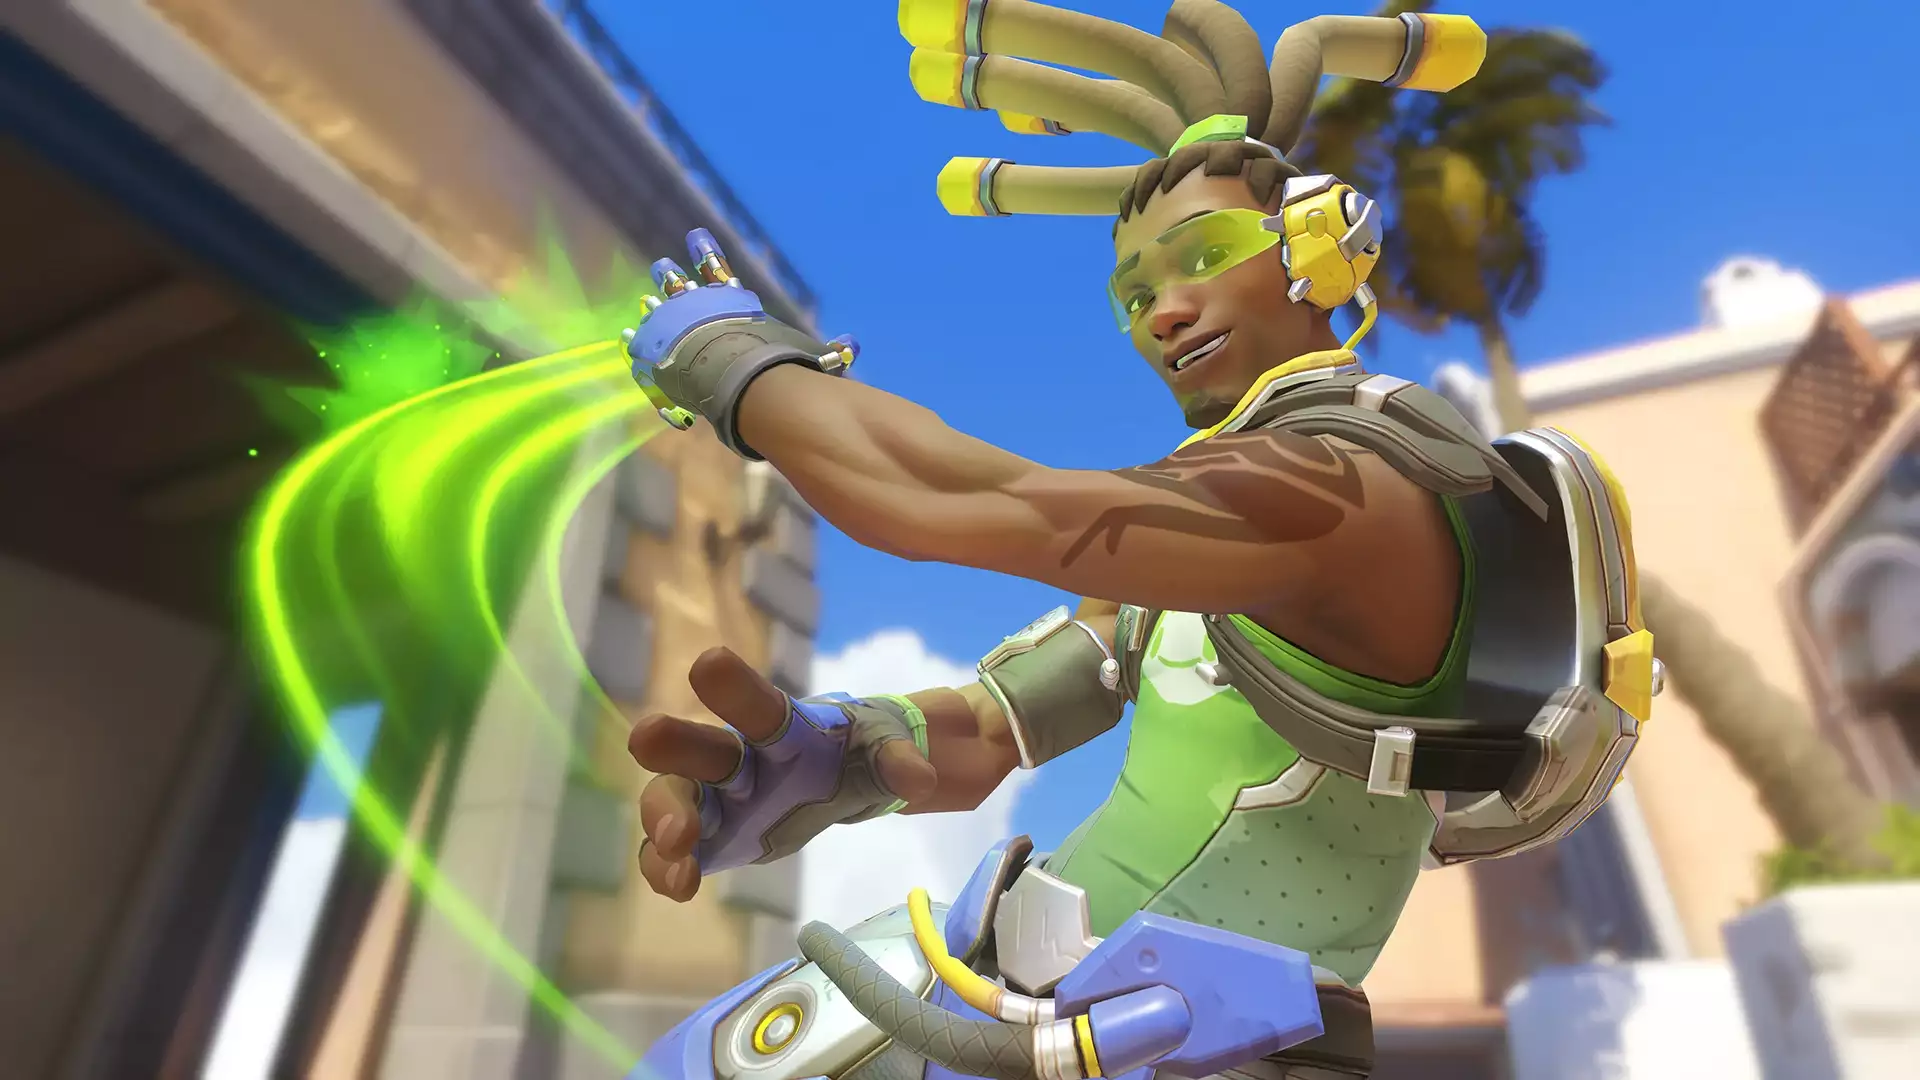 Lucio has a new look in Overwatch 2.